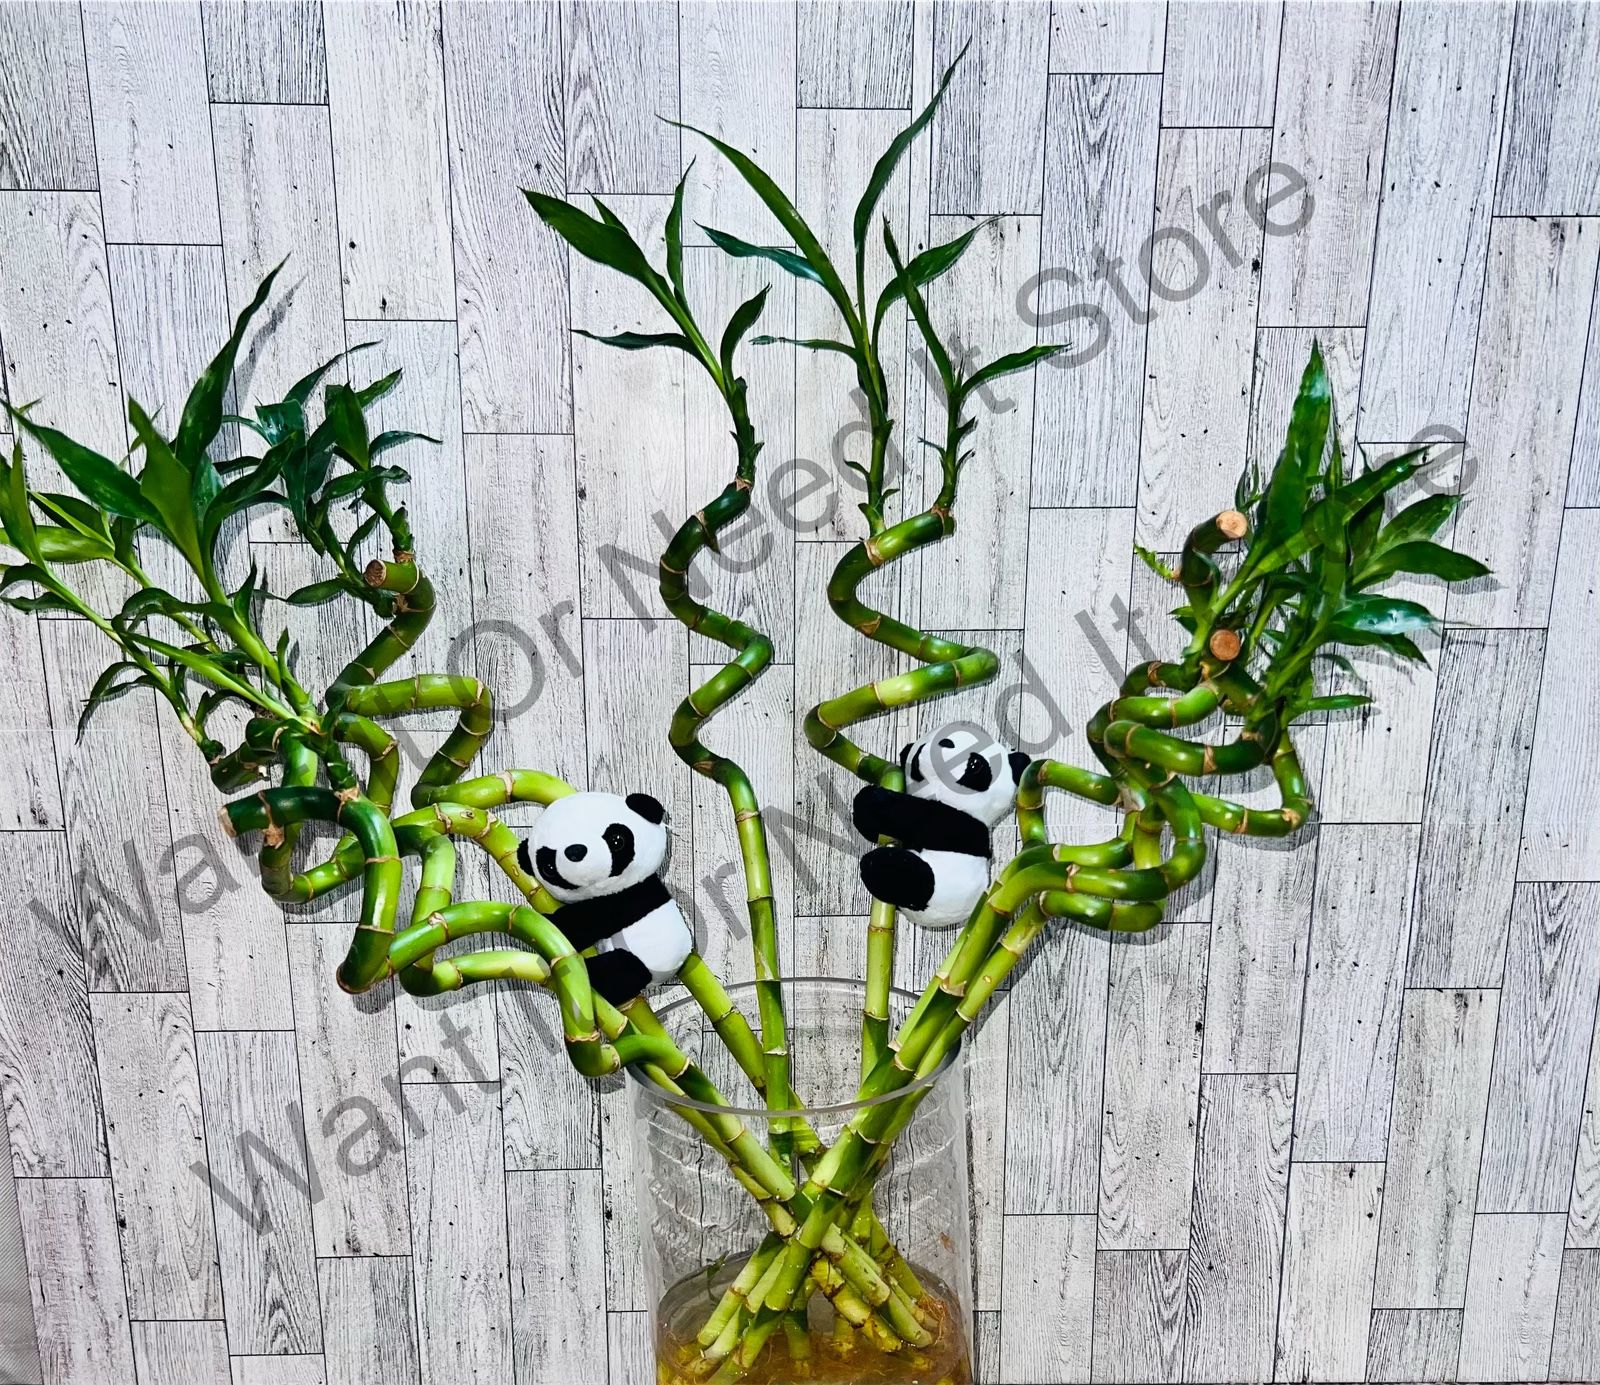 (2 feet+ Tall Total) Bundle Of Ten spiral curly lucky bamboo Plant W/ 1 Clip-on Plush Panda